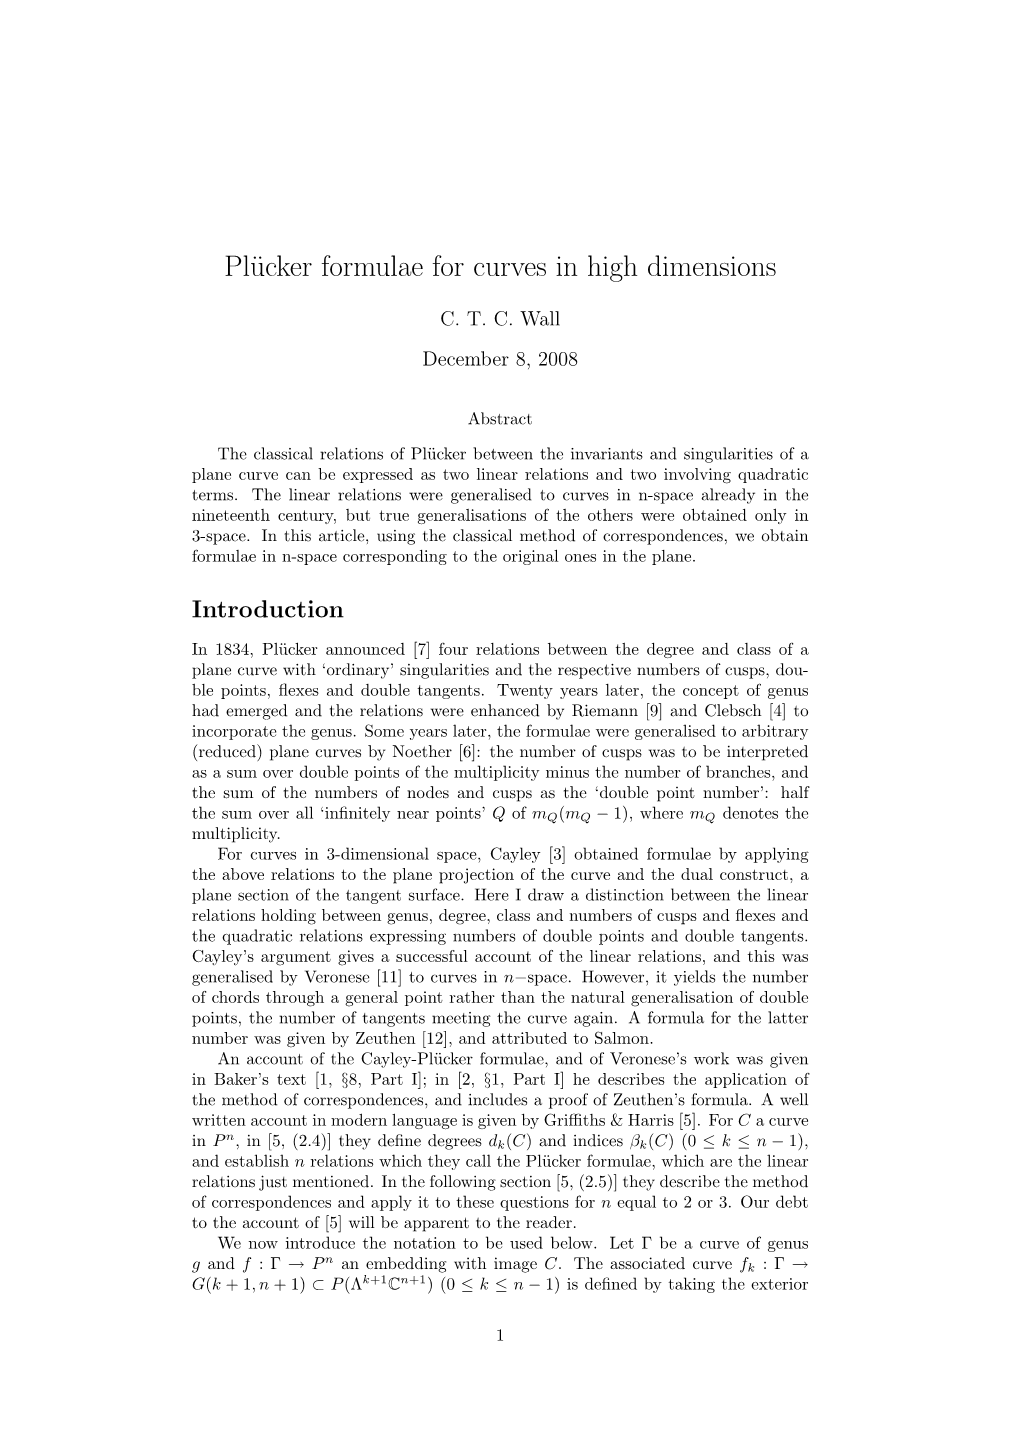 Plücker Formulae for Curves in High Dimensions